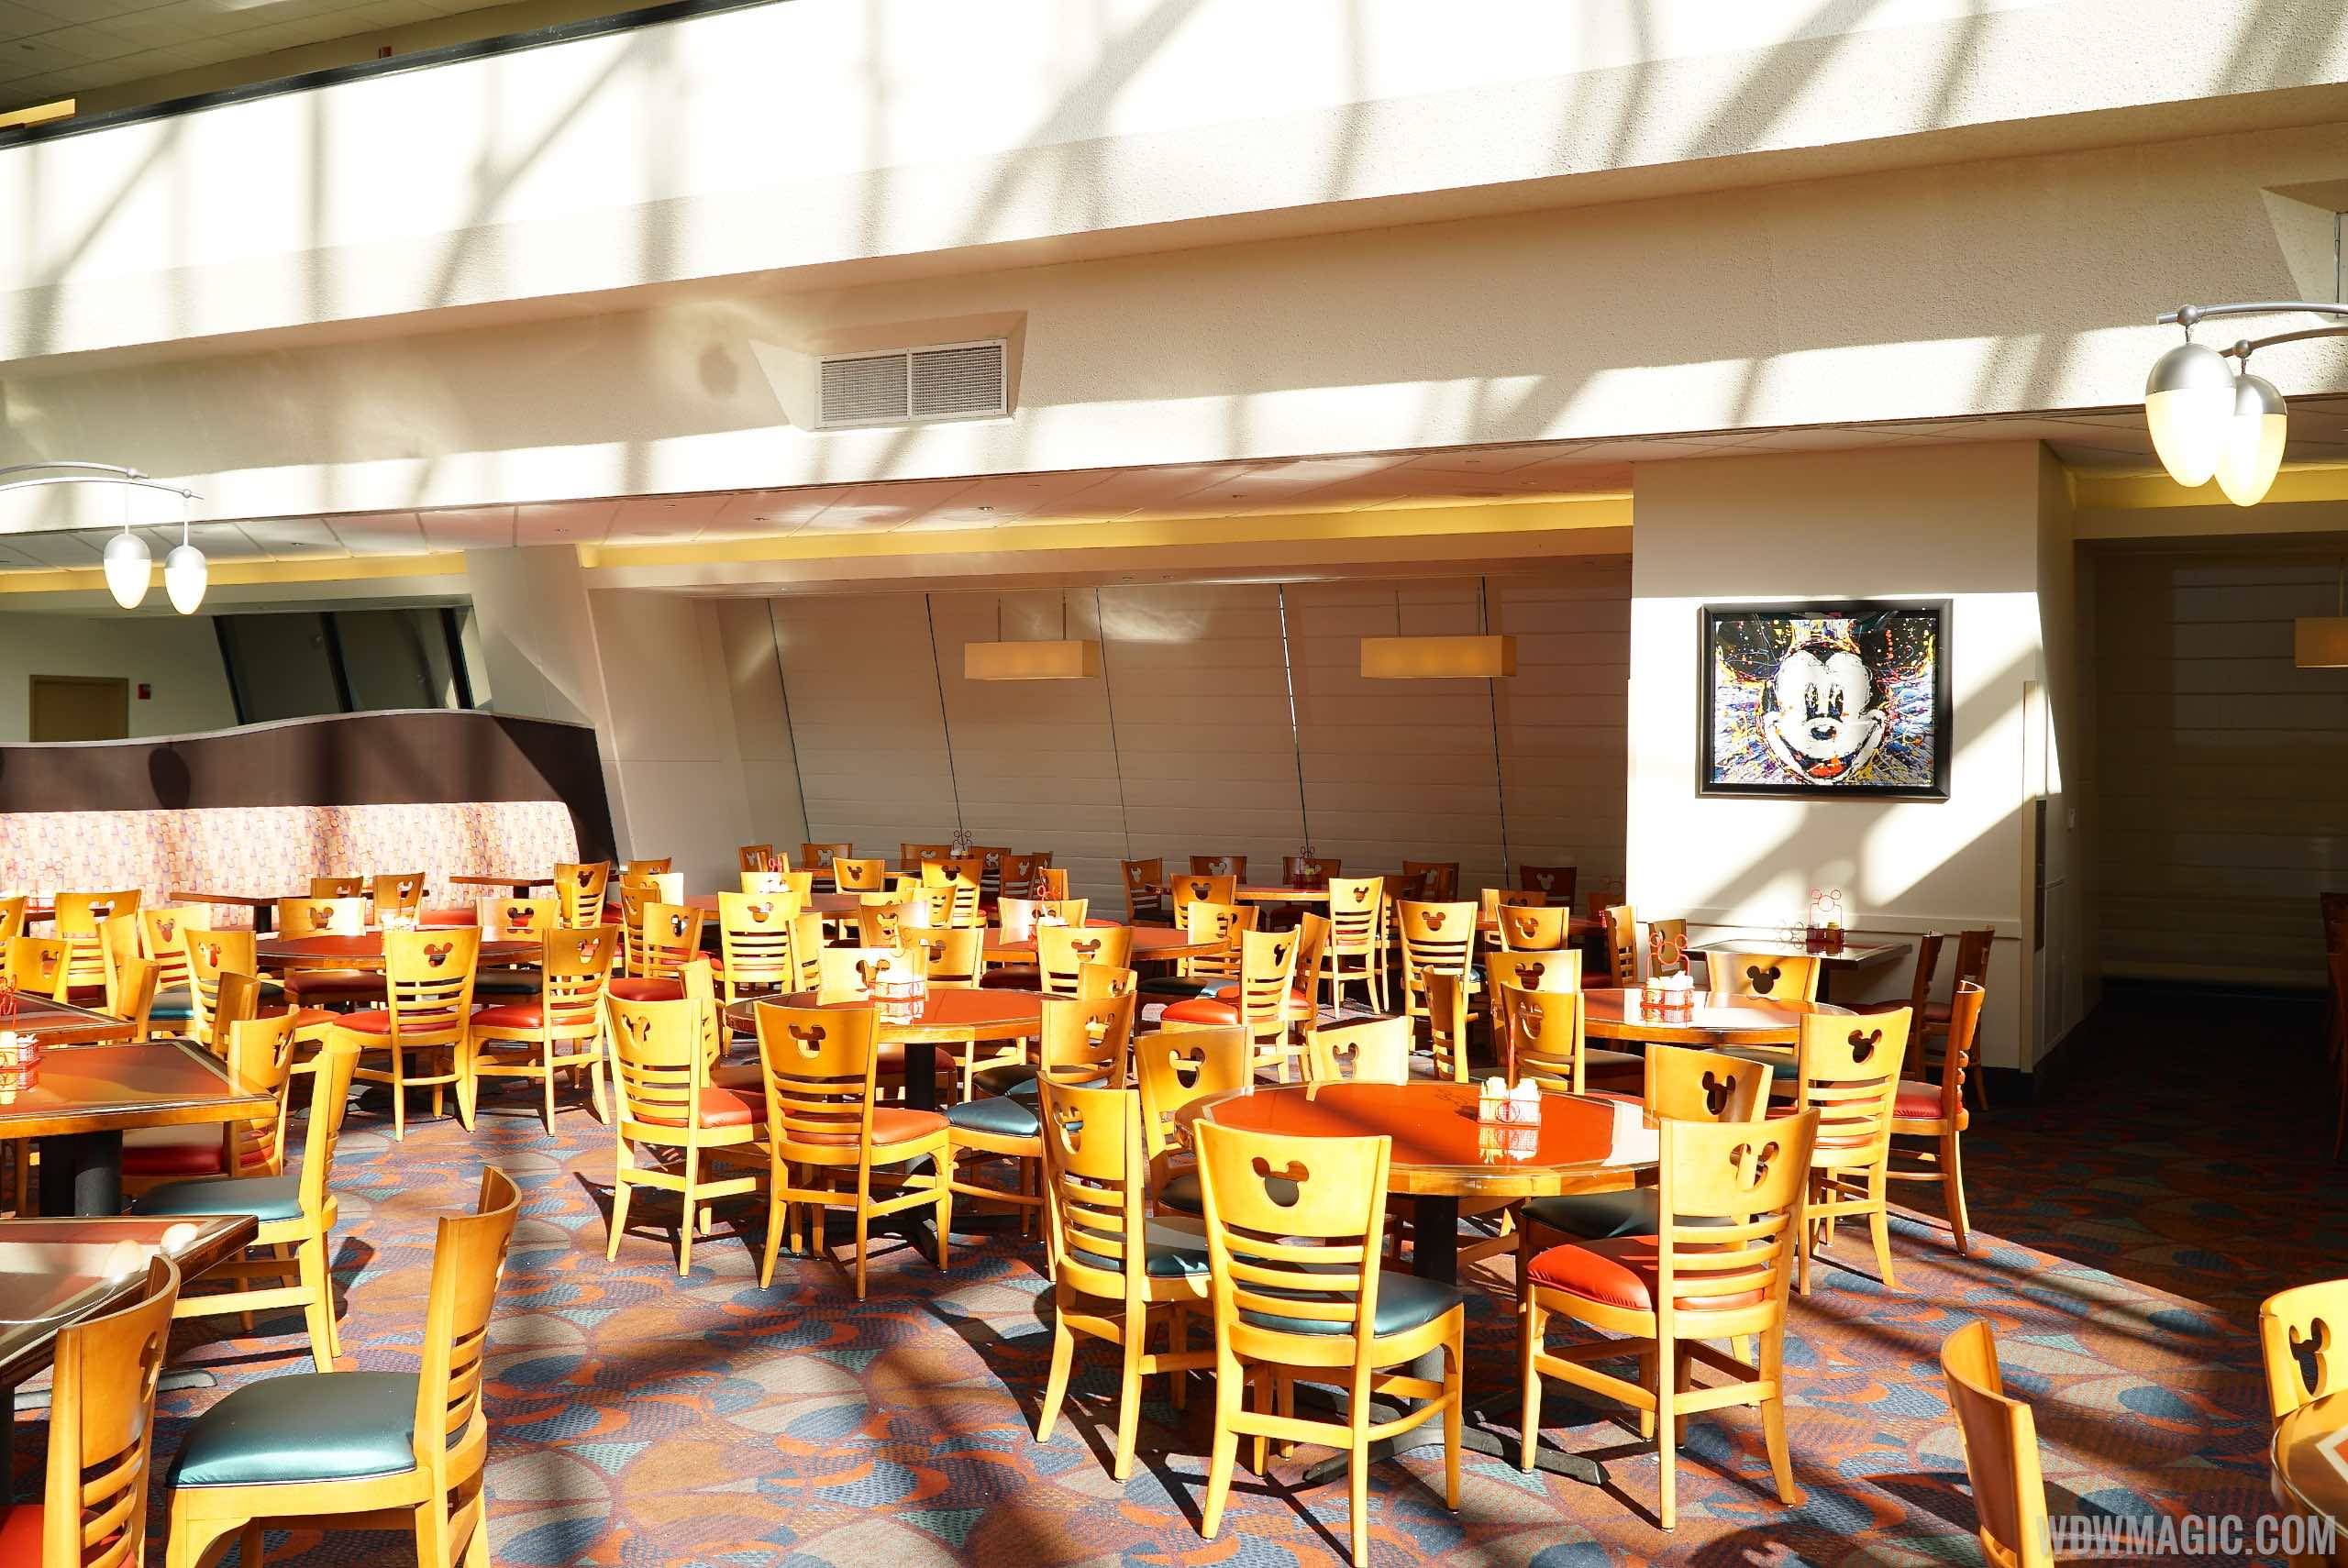 Chef Mickey's adding a Character Lunch Buffet to meet free dining demand through to October